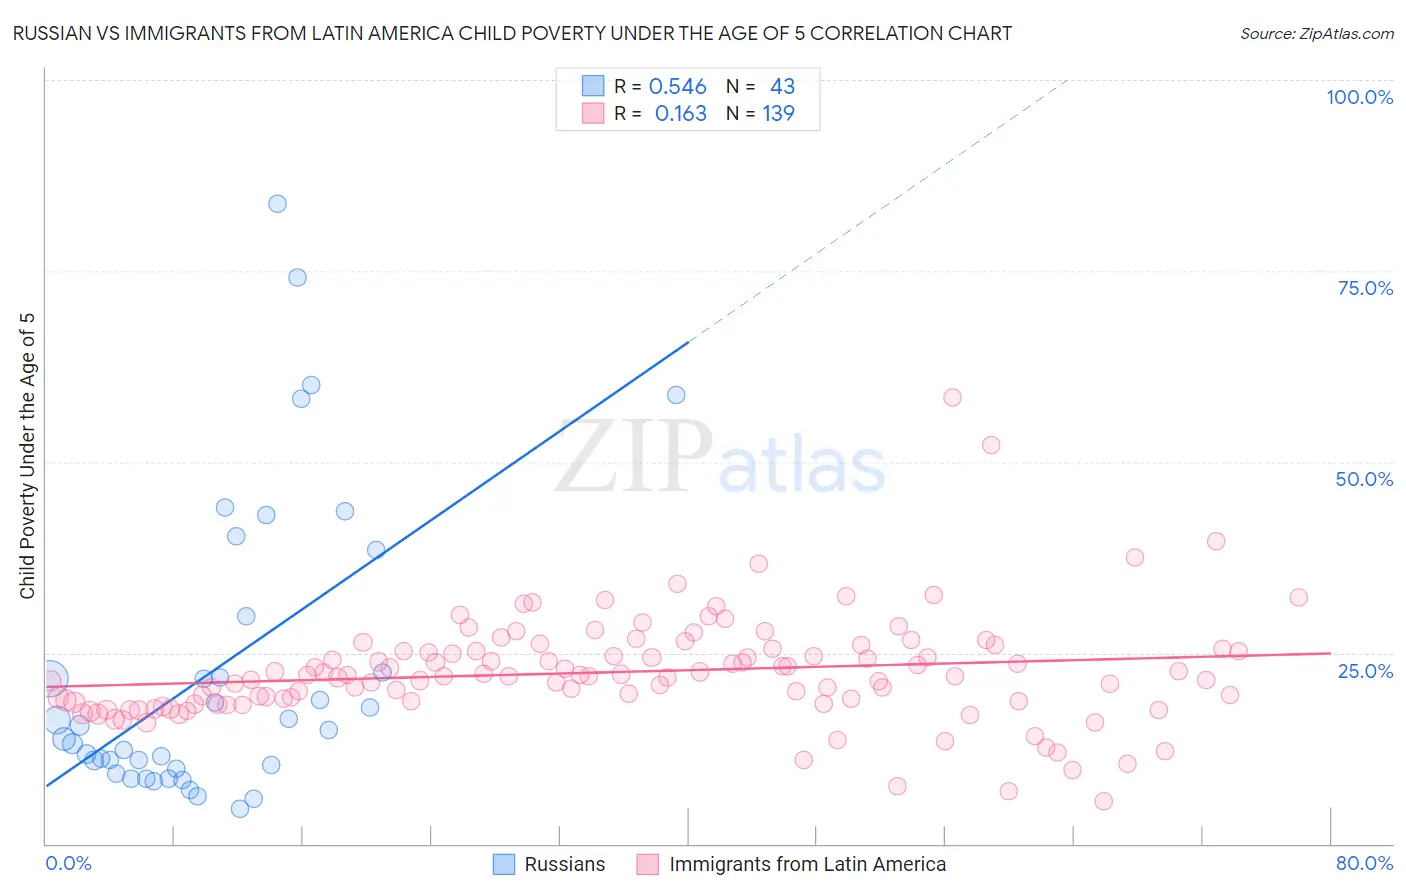 Russian vs Immigrants from Latin America Child Poverty Under the Age of 5